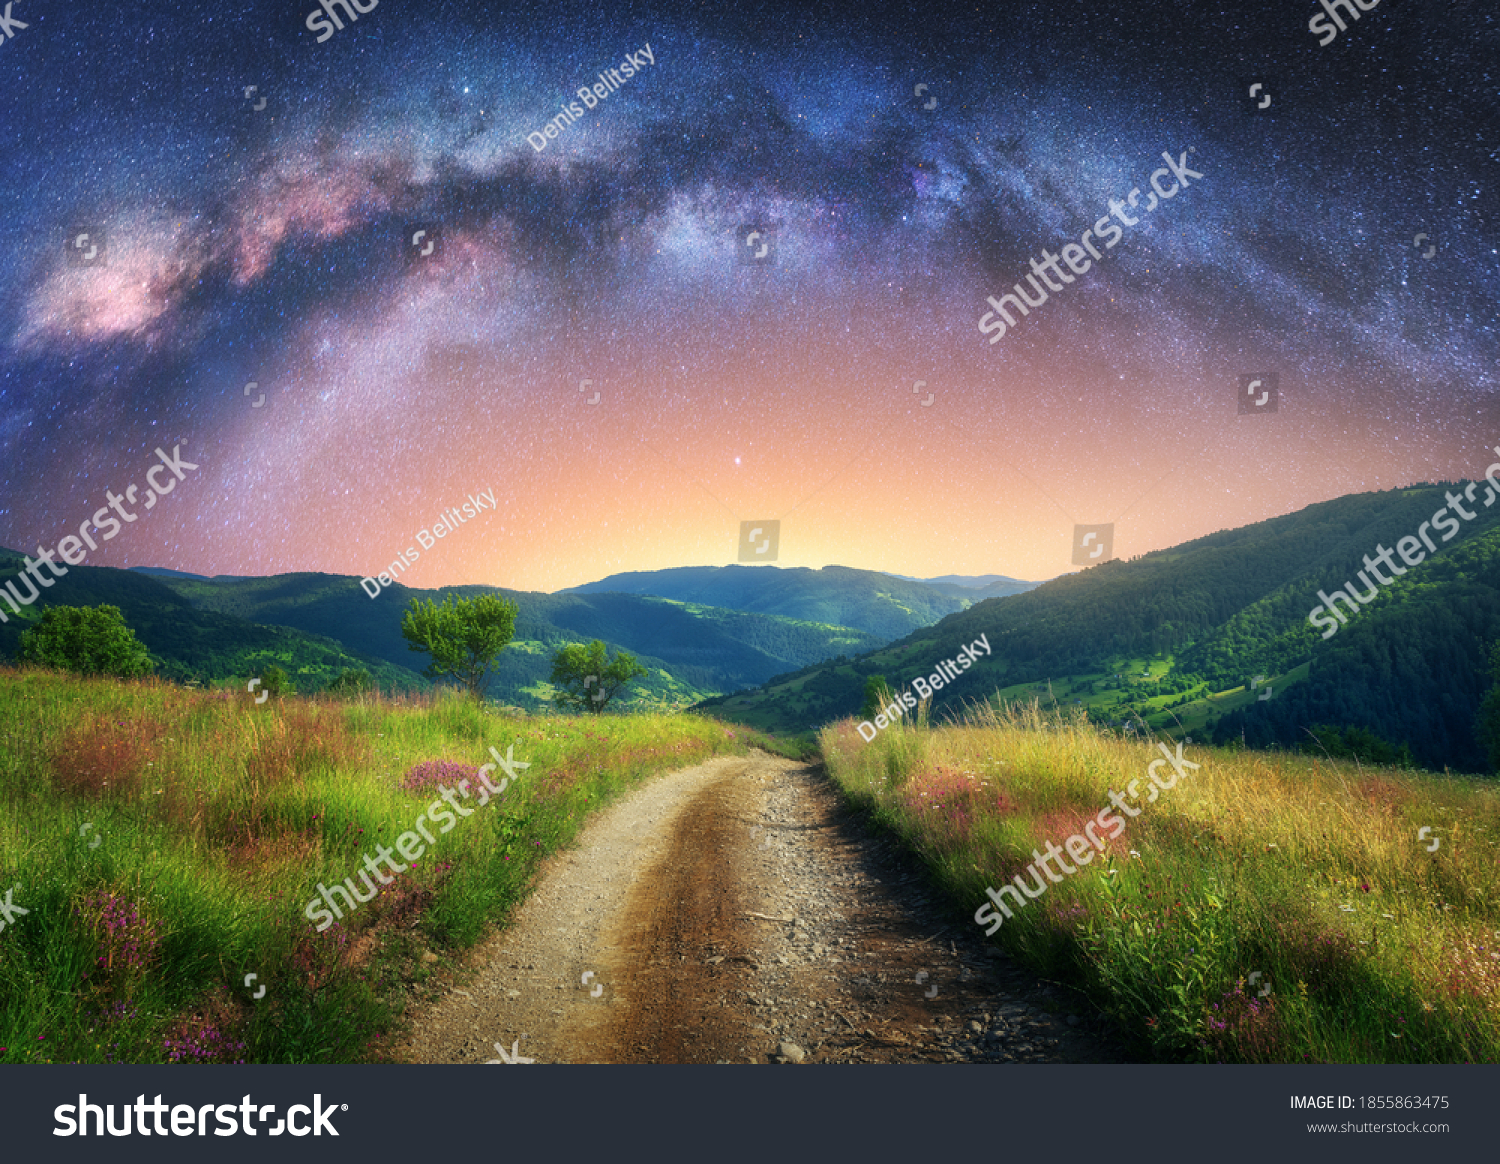 Arched Milky Way over the mountain dirt road in summer. Beautiful night landscape with starry sky, milky way arch, trail in mountain village, hills, green grass and purple flowers. Space and galaxy #1855863475